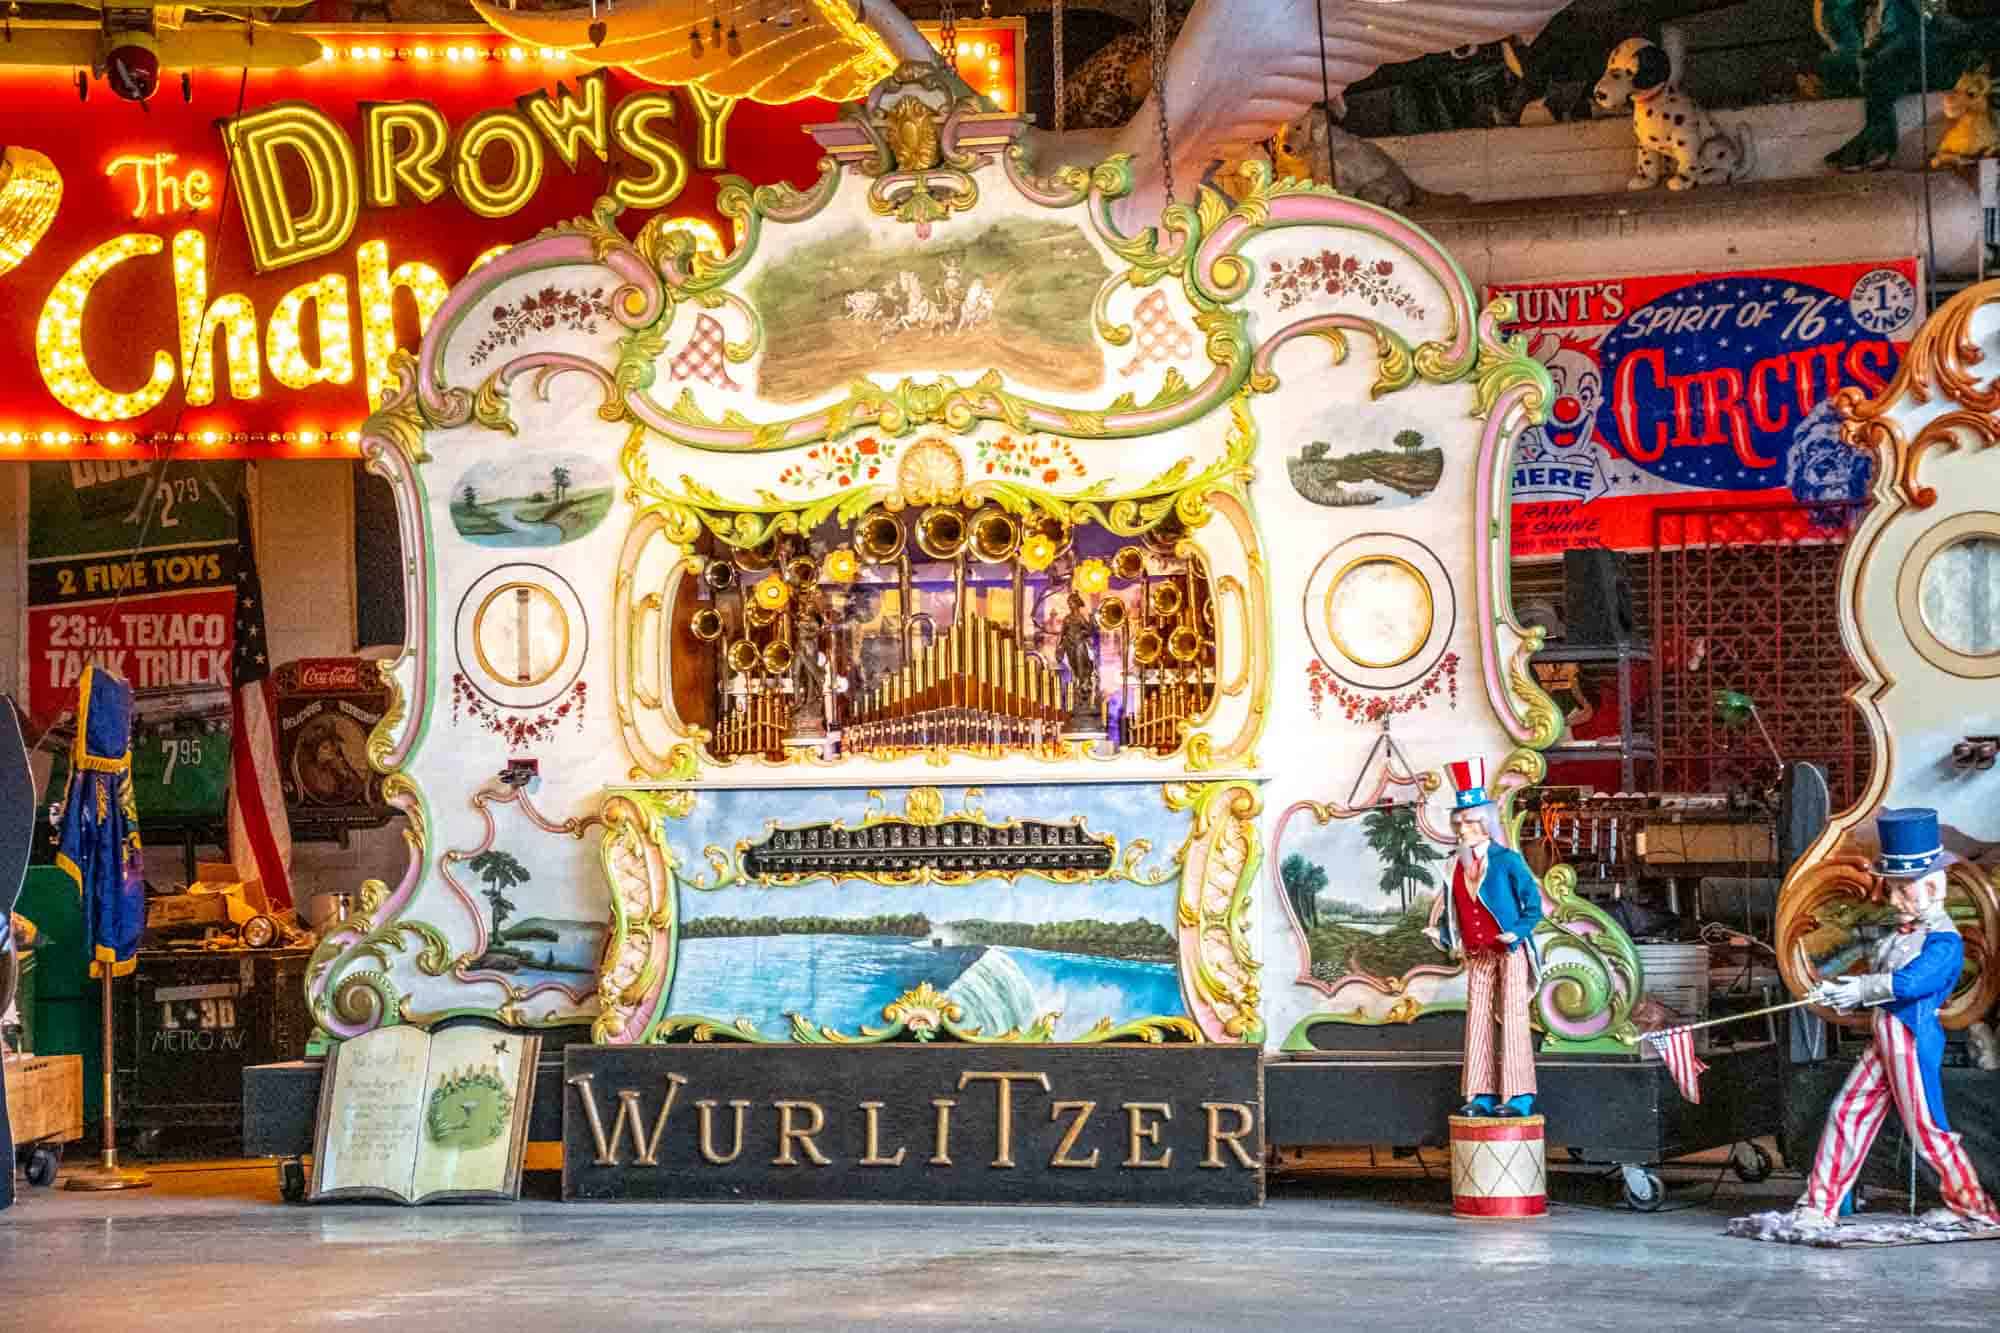 Old-fashioned Wurlitzer organ with floral decorations